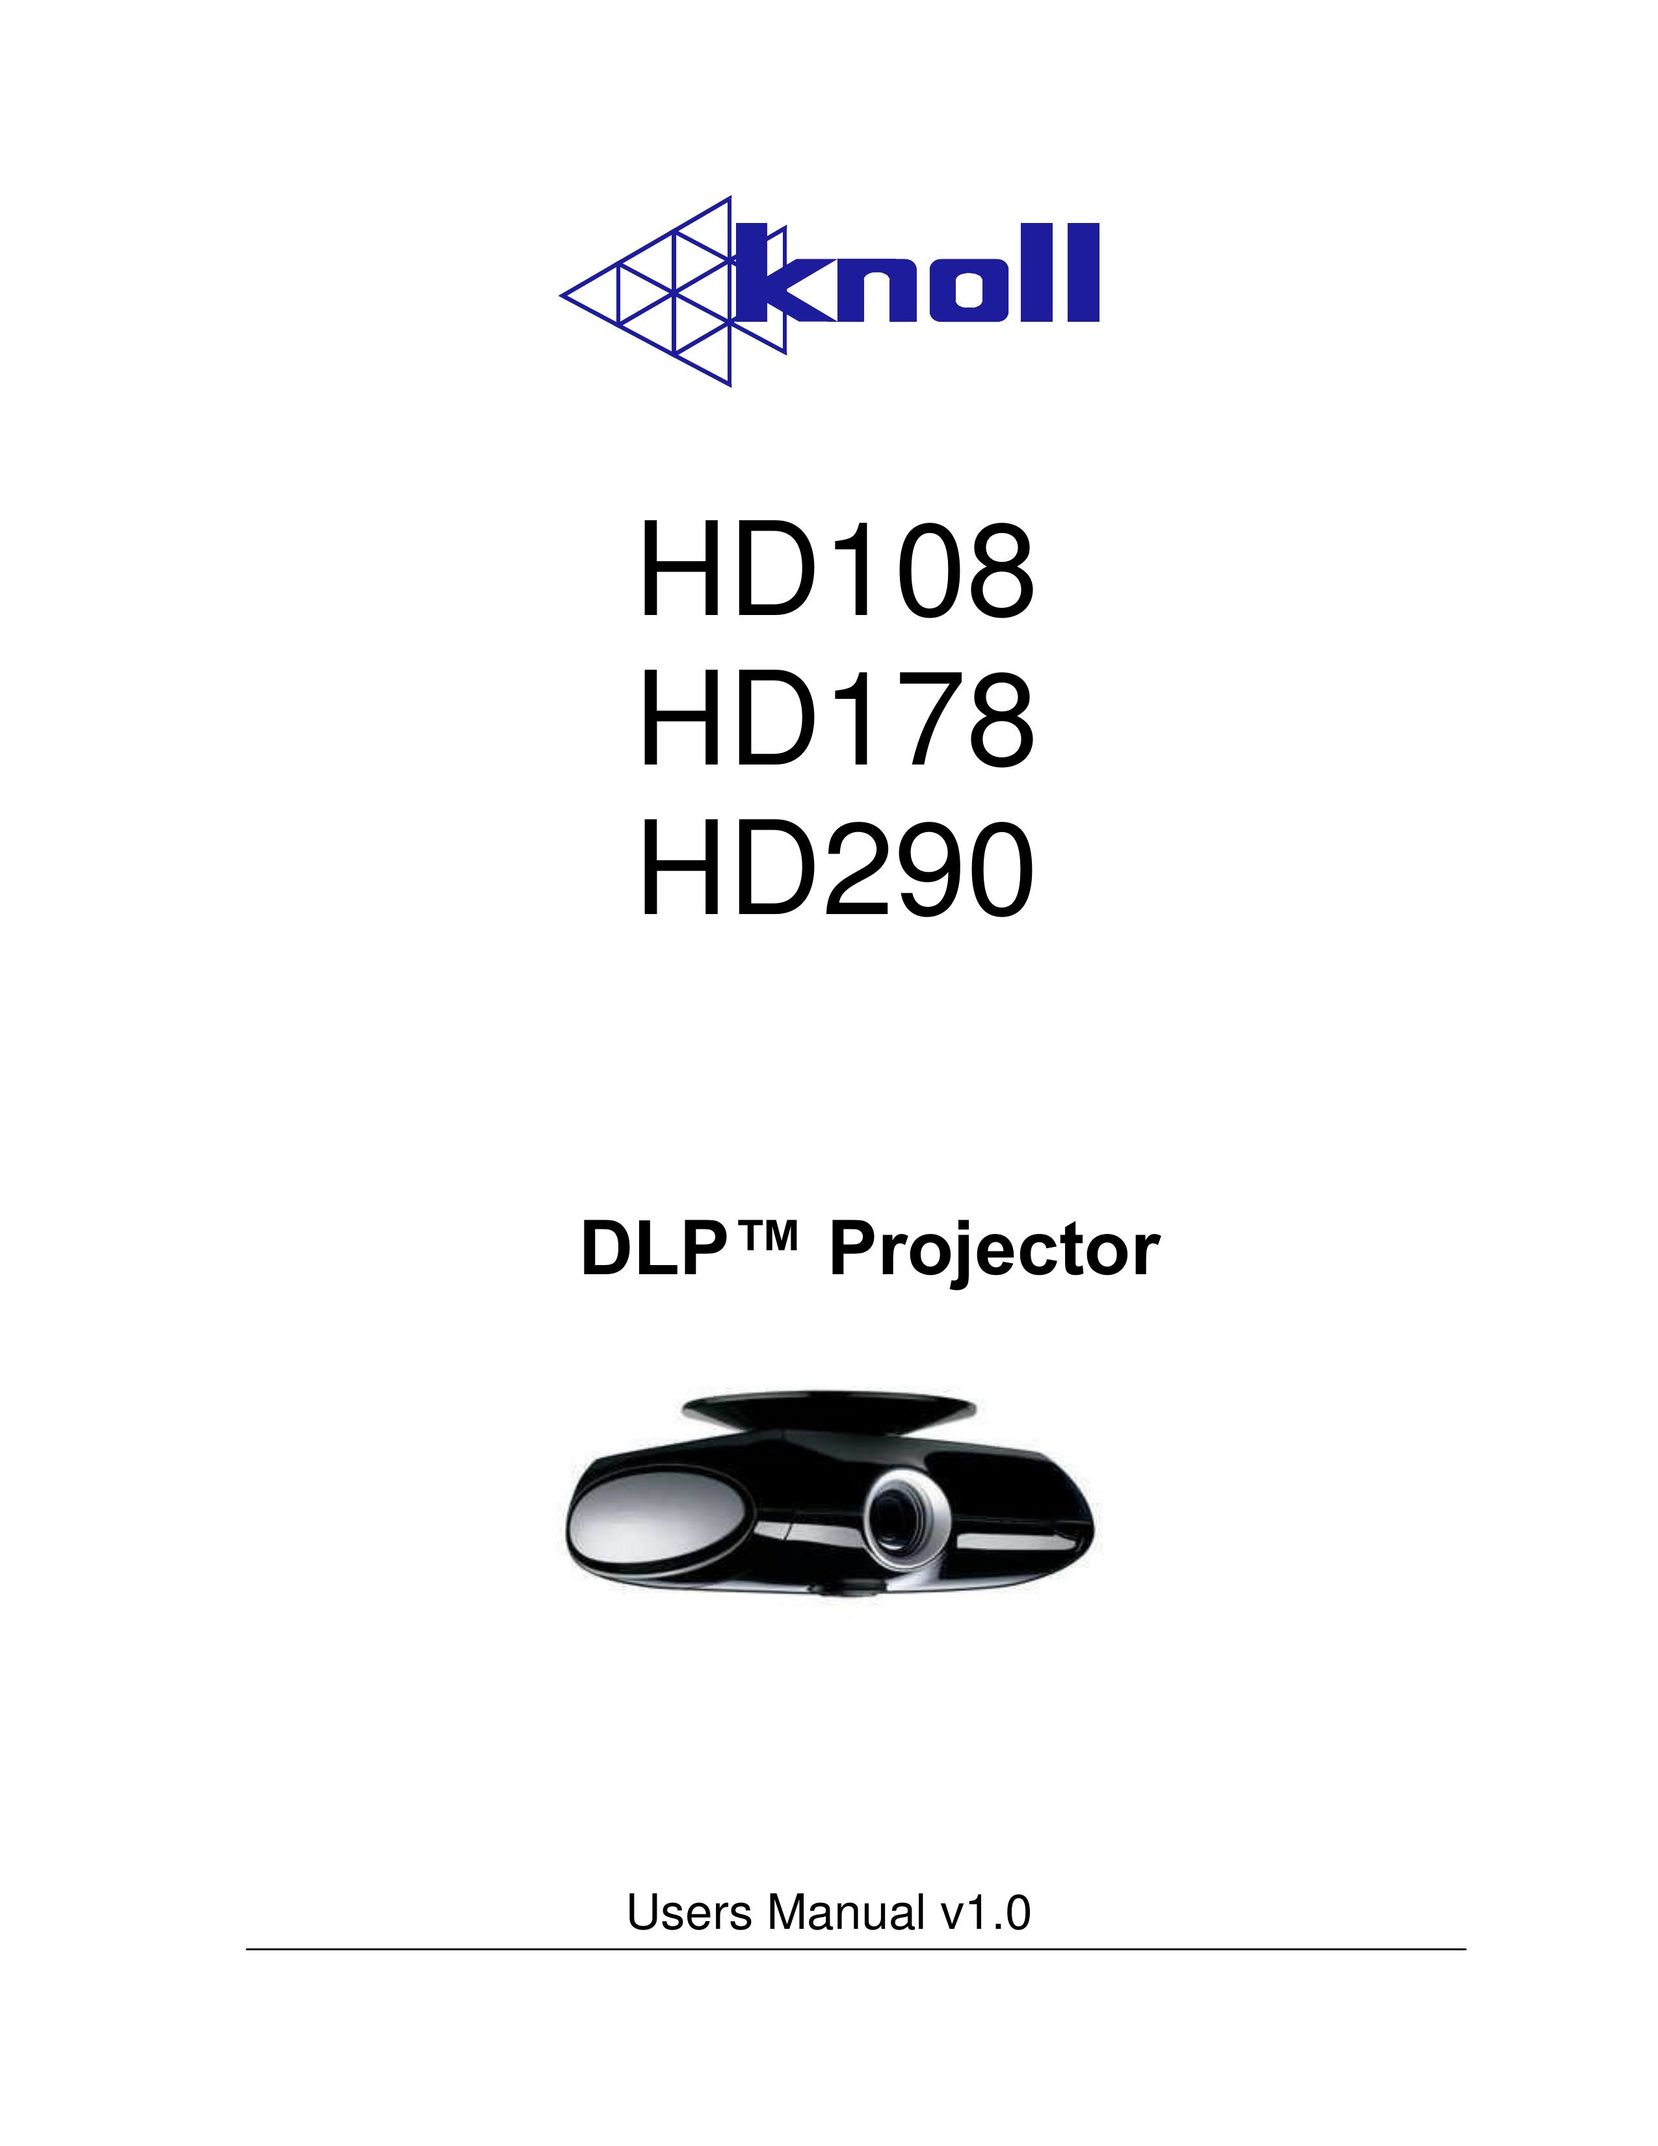 Knoll Systems HD178 Computer Accessories User Manual